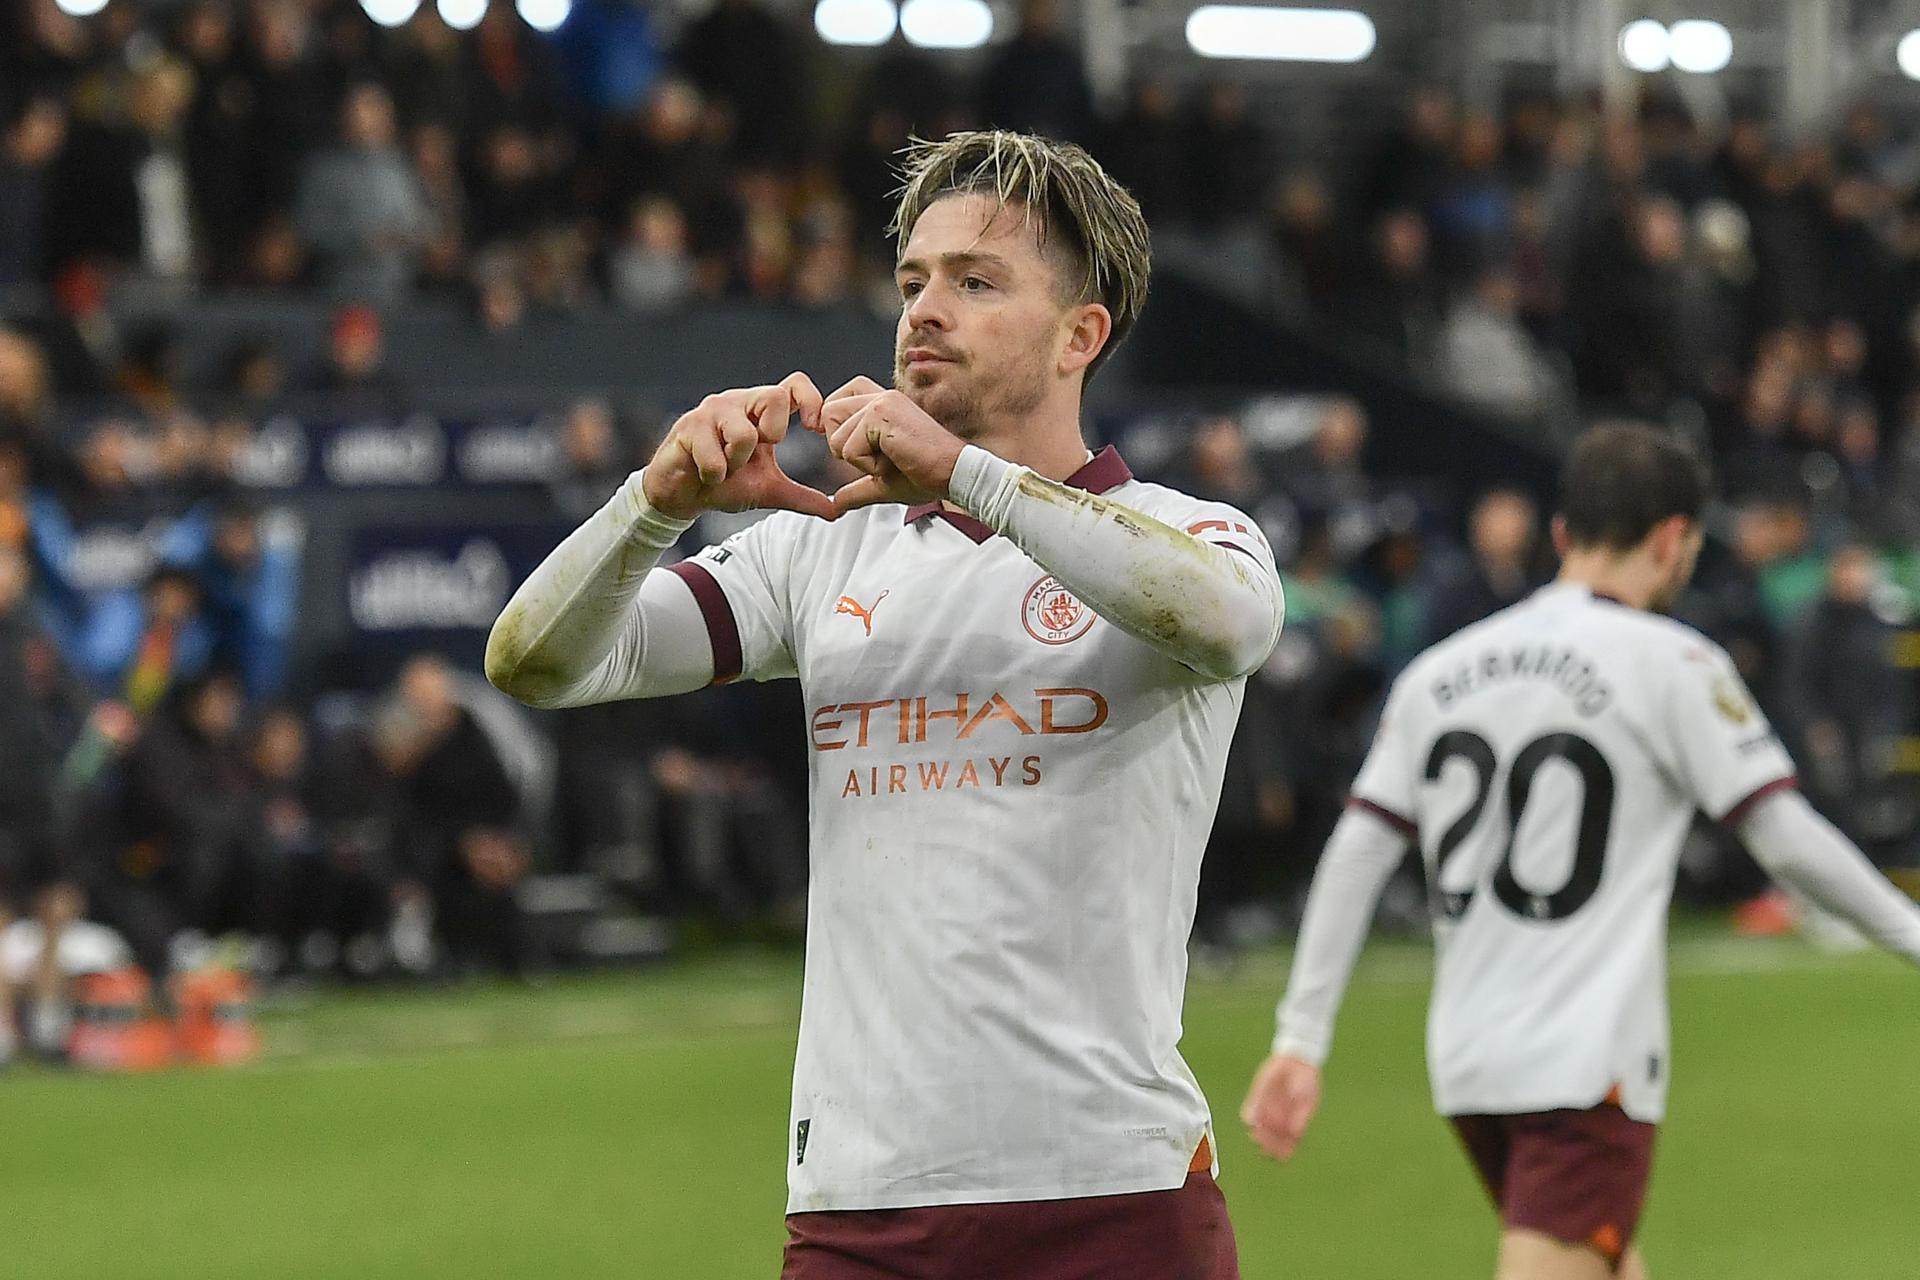 Grealish 'always wondering' why opposition fans boo him